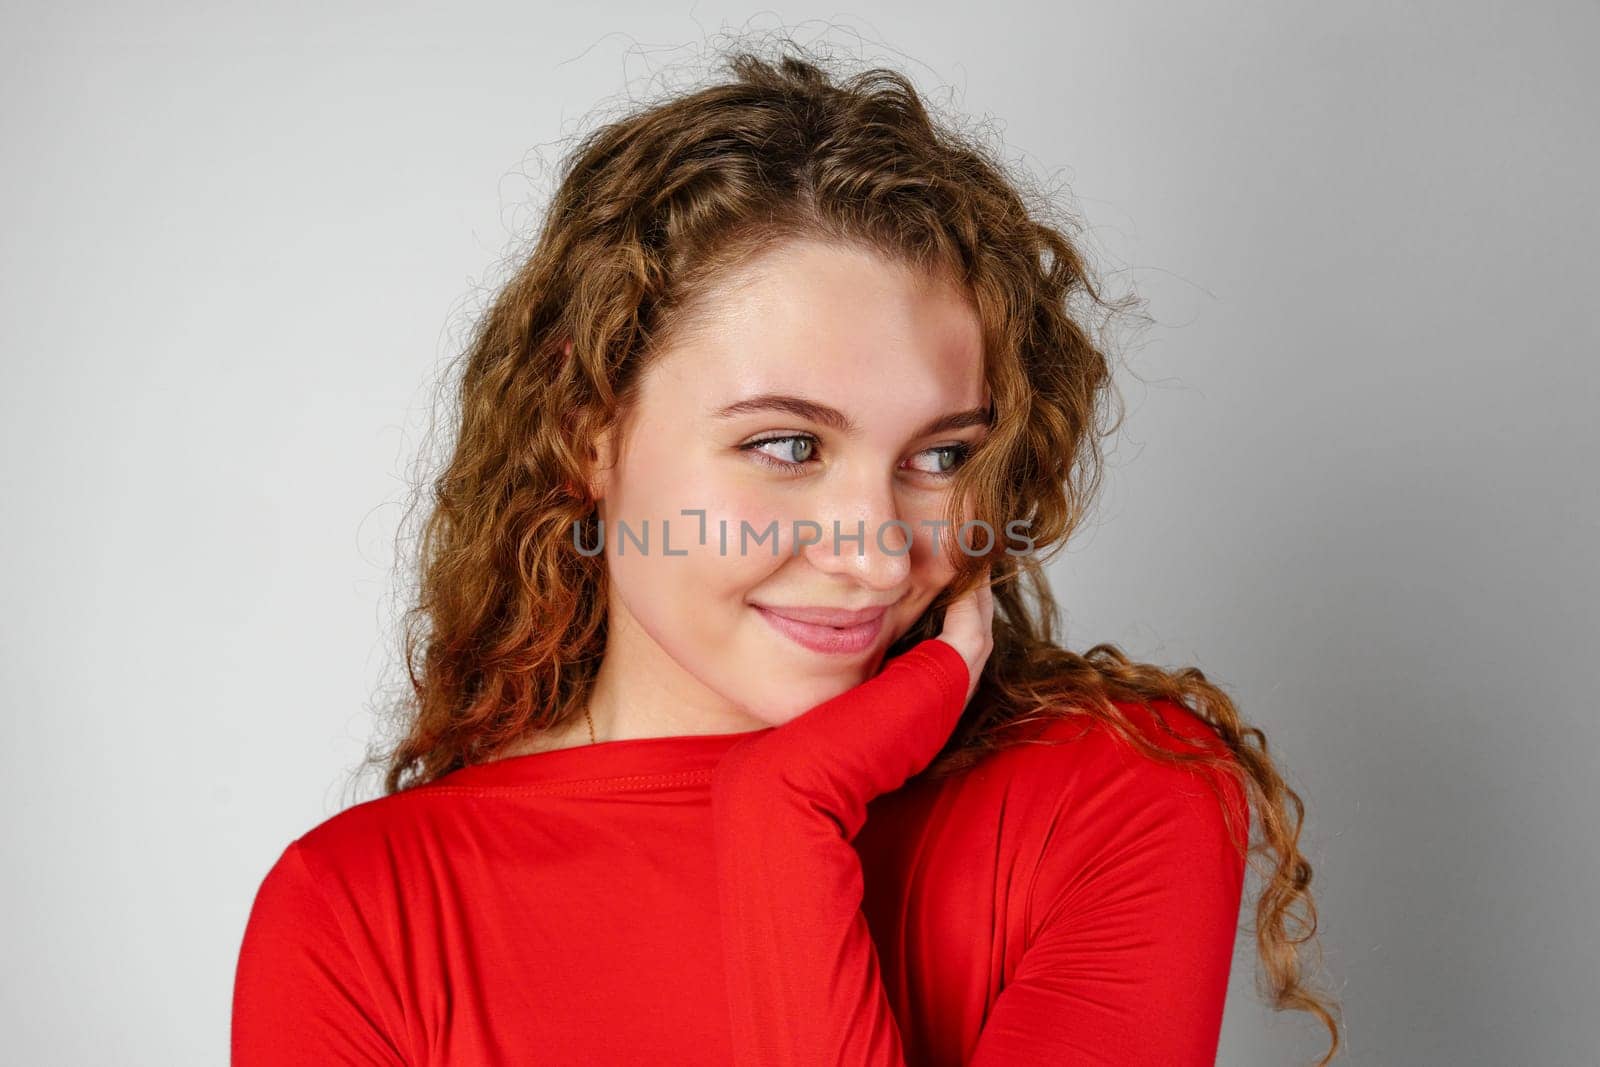 Woman With Curly Hair Standing on Gray Background portrait